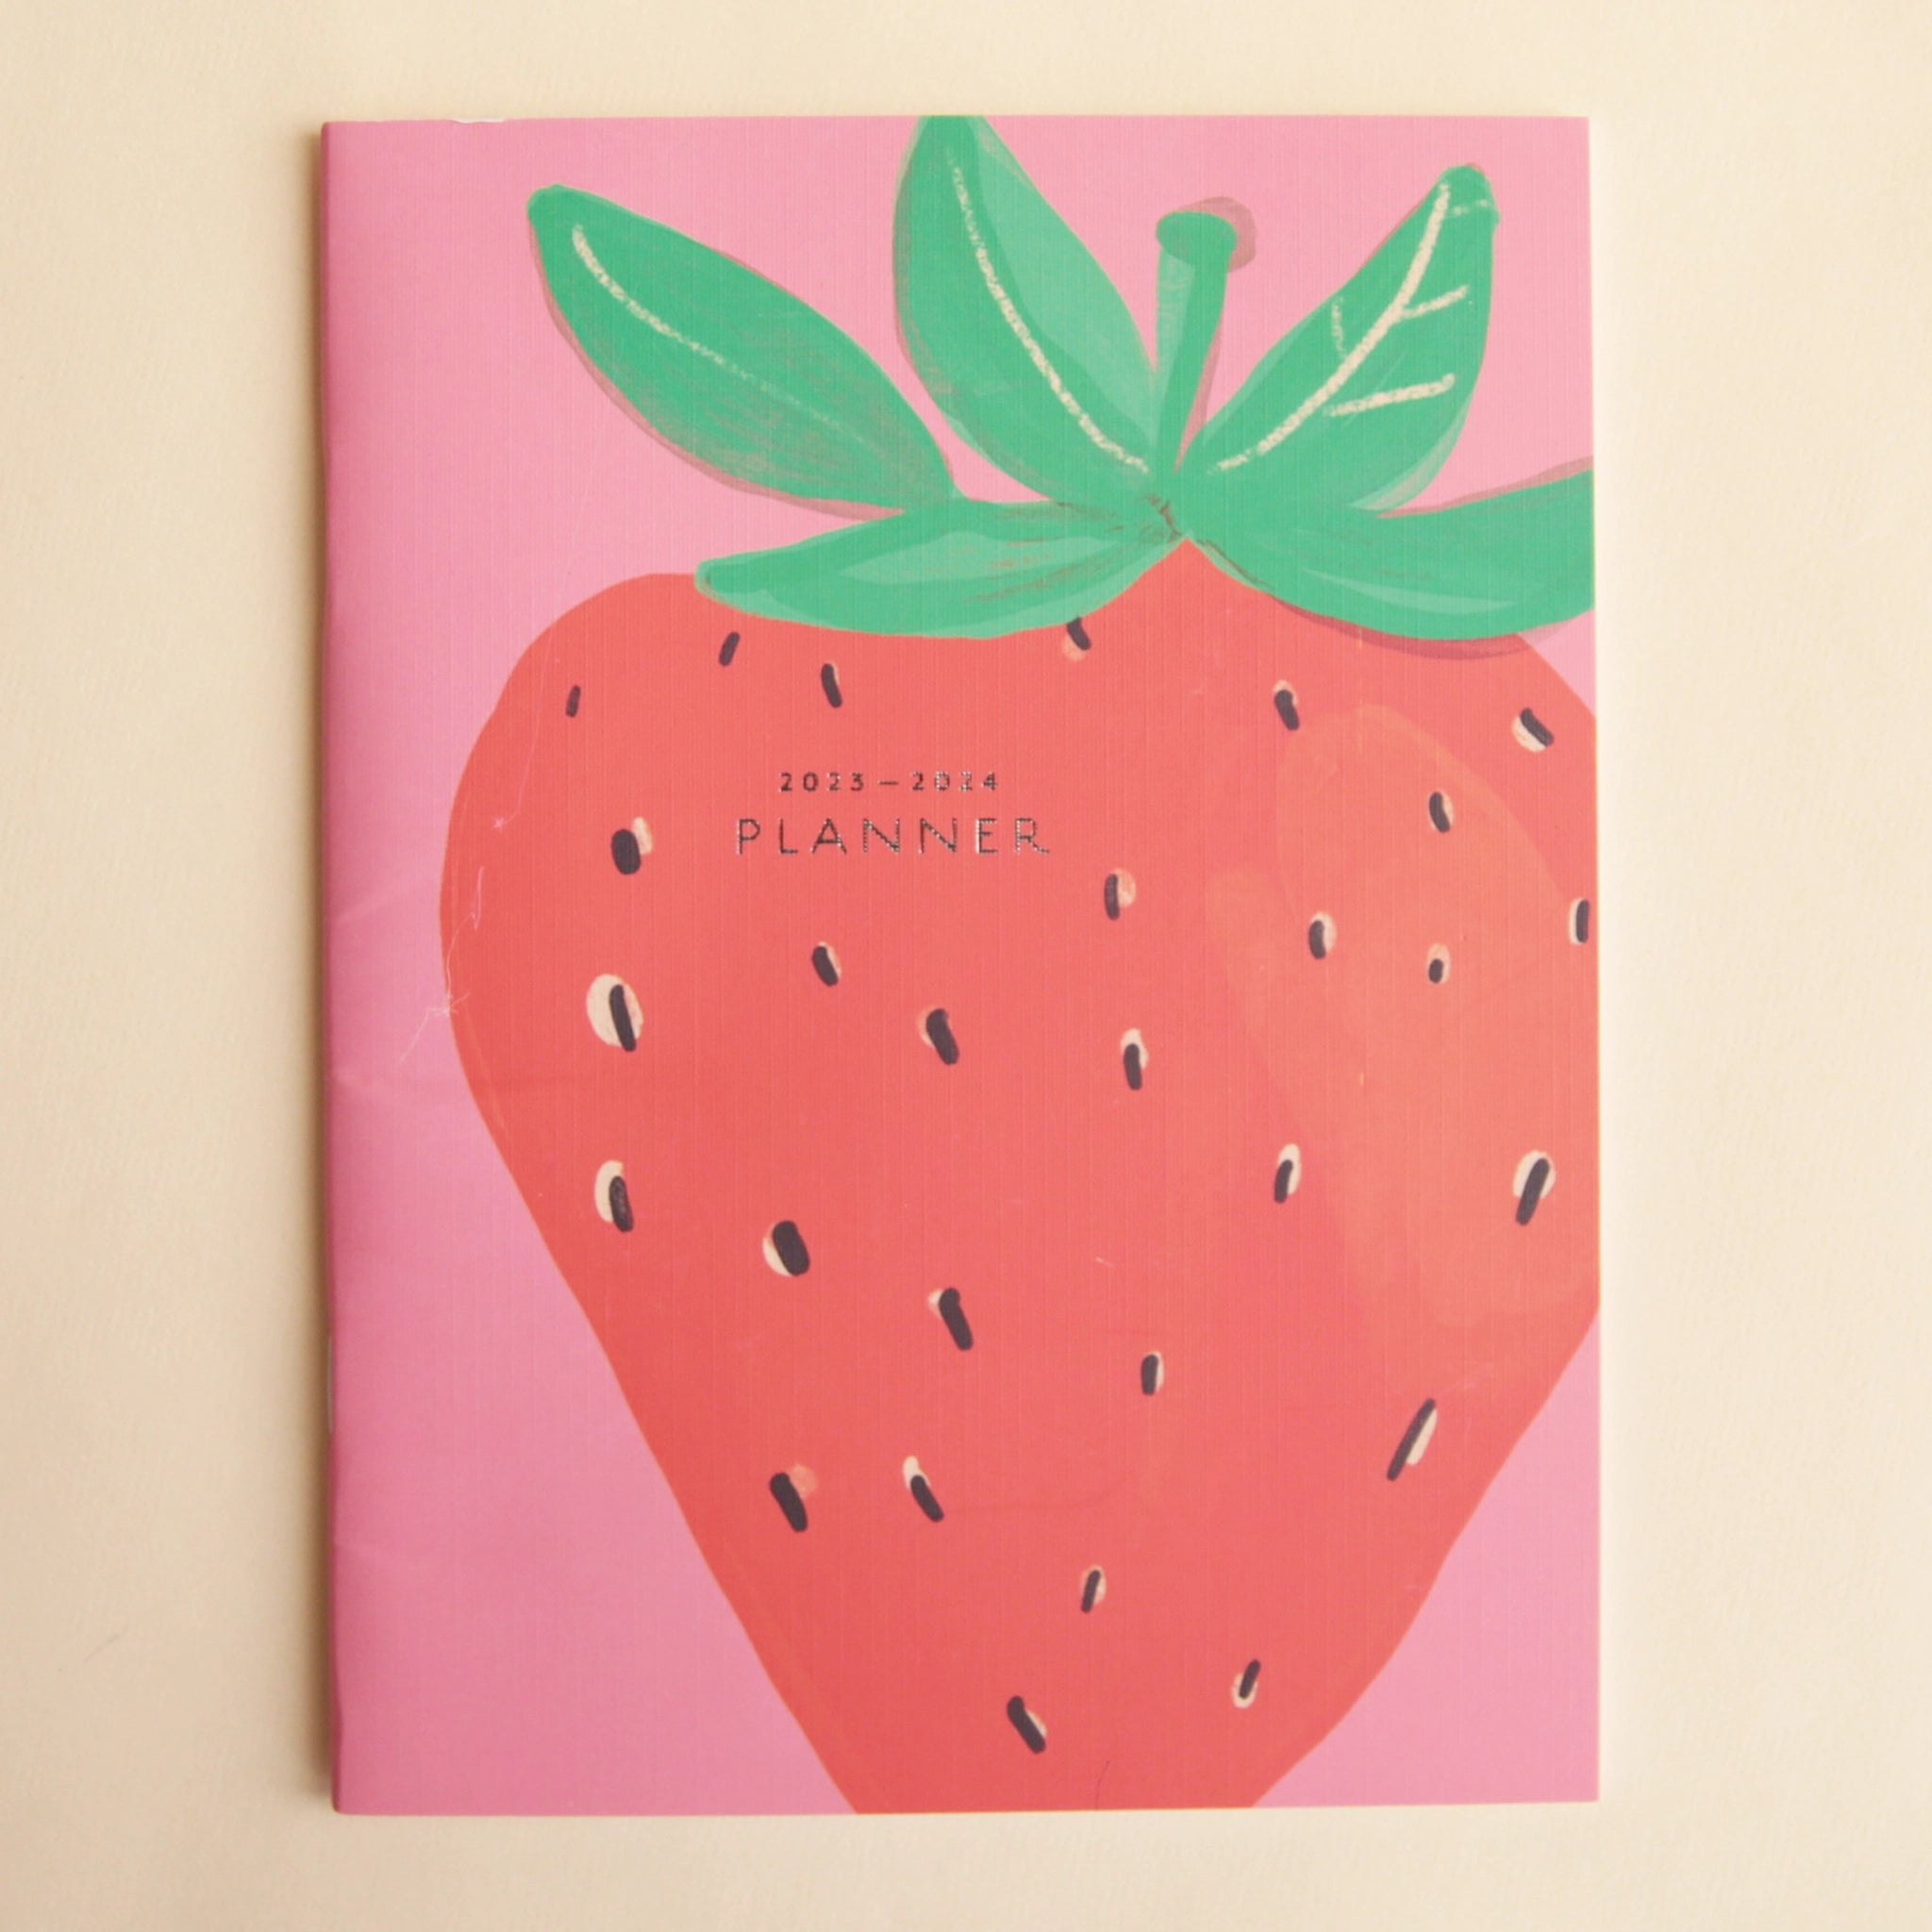 On a beige background is a pink and red planner with an illustration of a strawberry on the front that takes up nearly the entire cover. There is text in the center that reads, "2023-2024 PLANNER". 